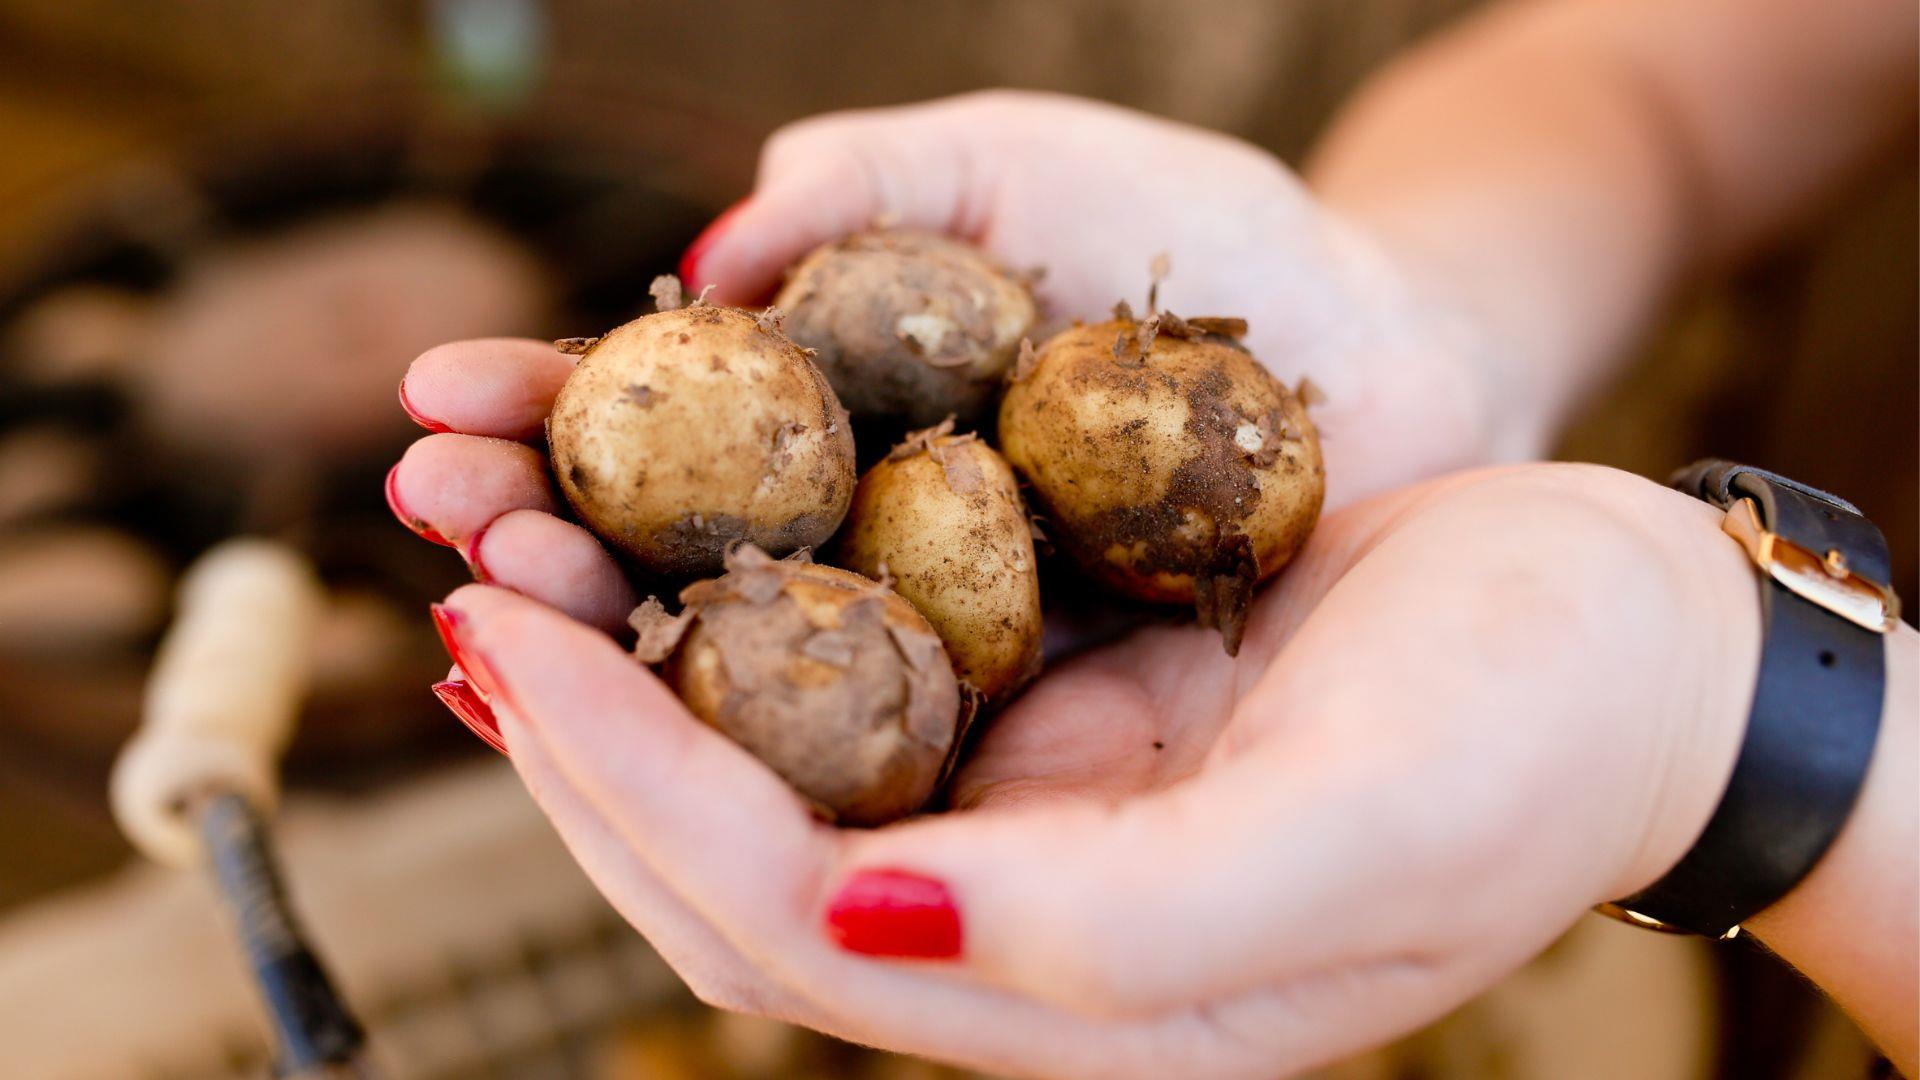 Hands holding Comber Early potatoes